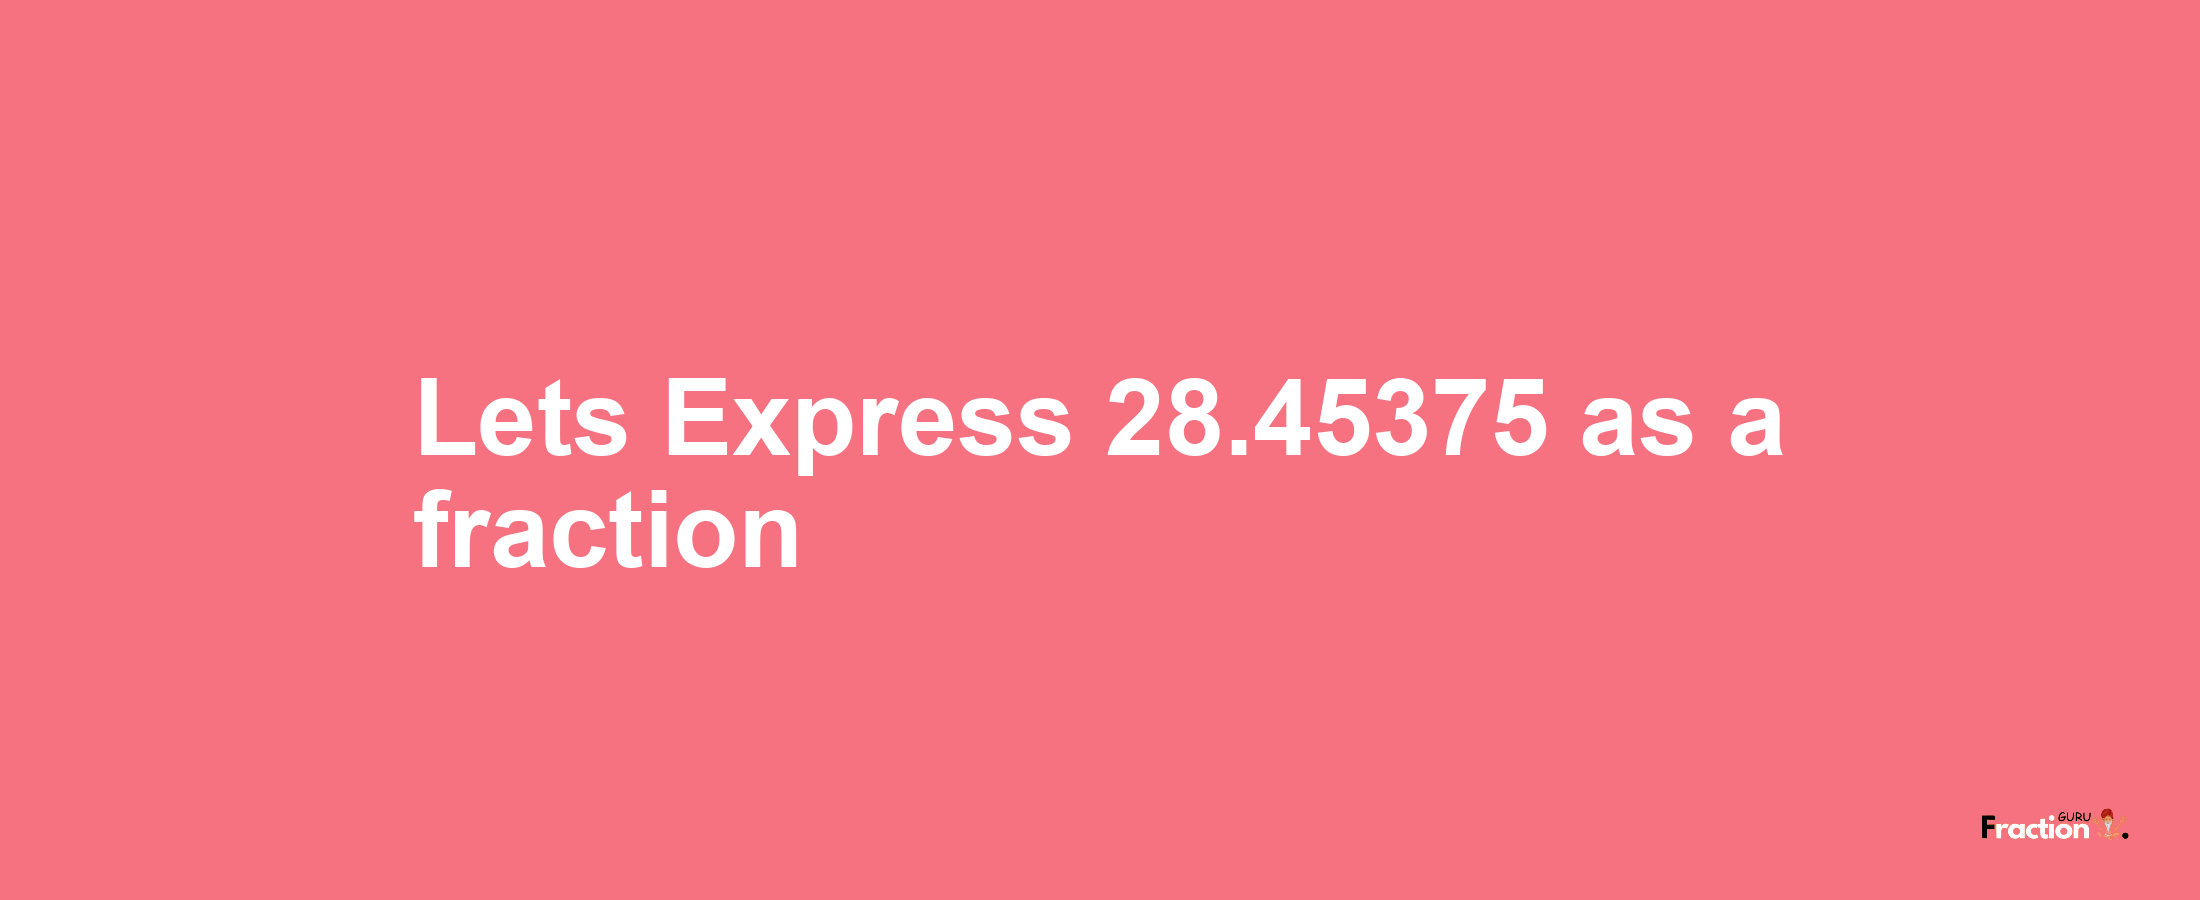 Lets Express 28.45375 as afraction